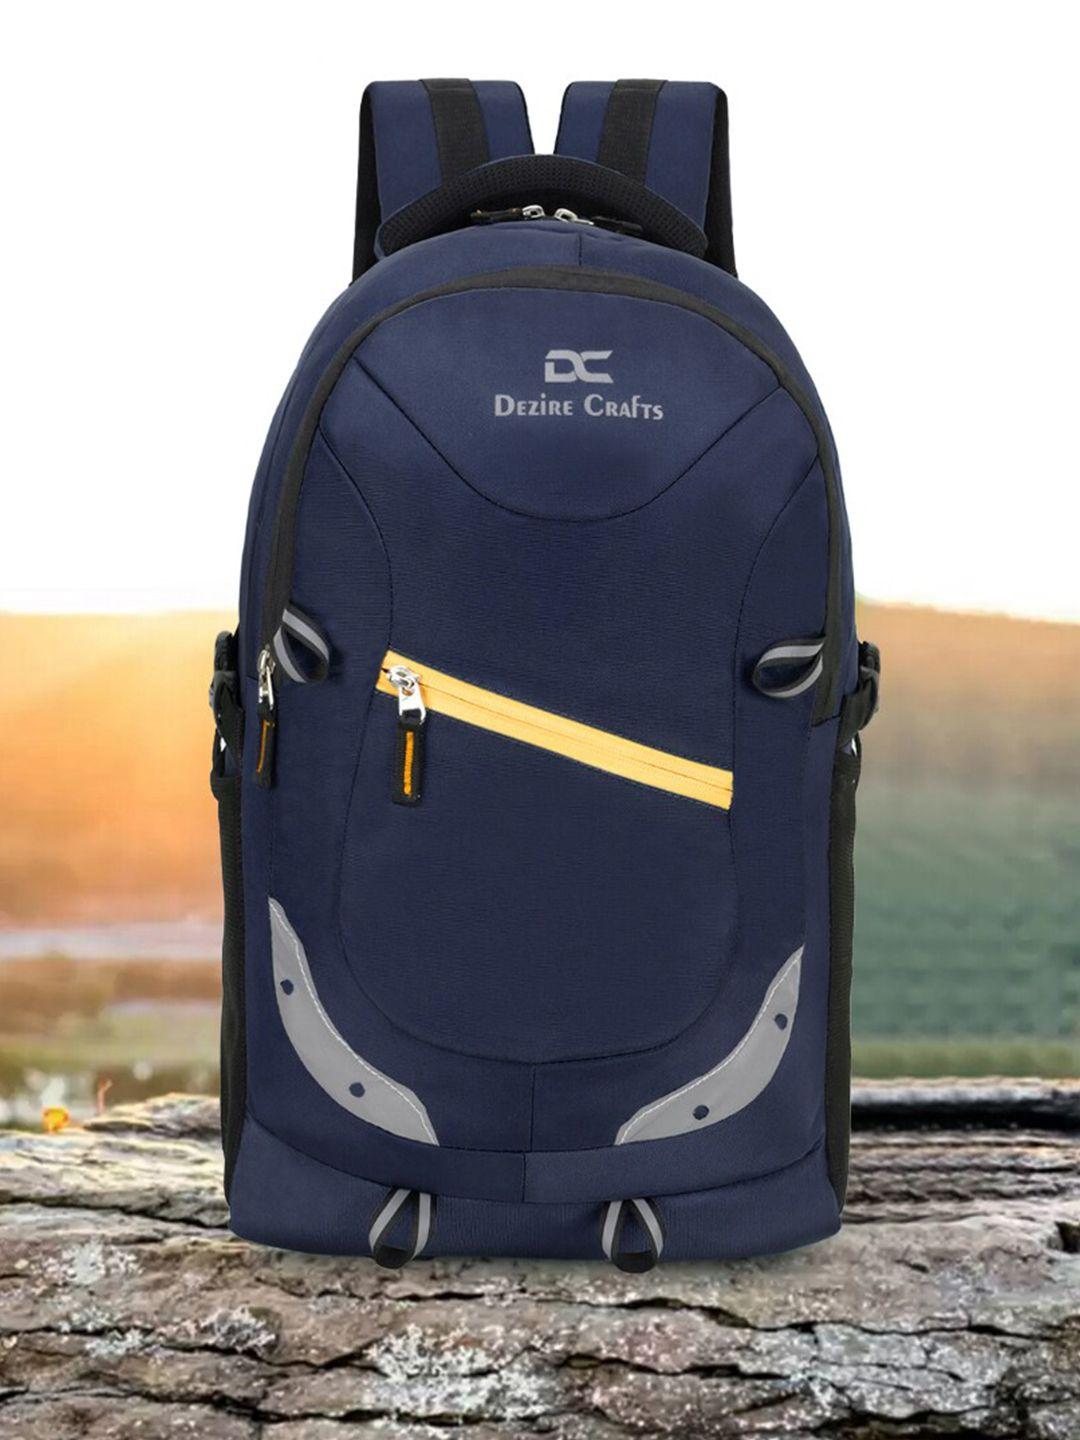 dezire crafts unisex navy blue backpack with reflective strip